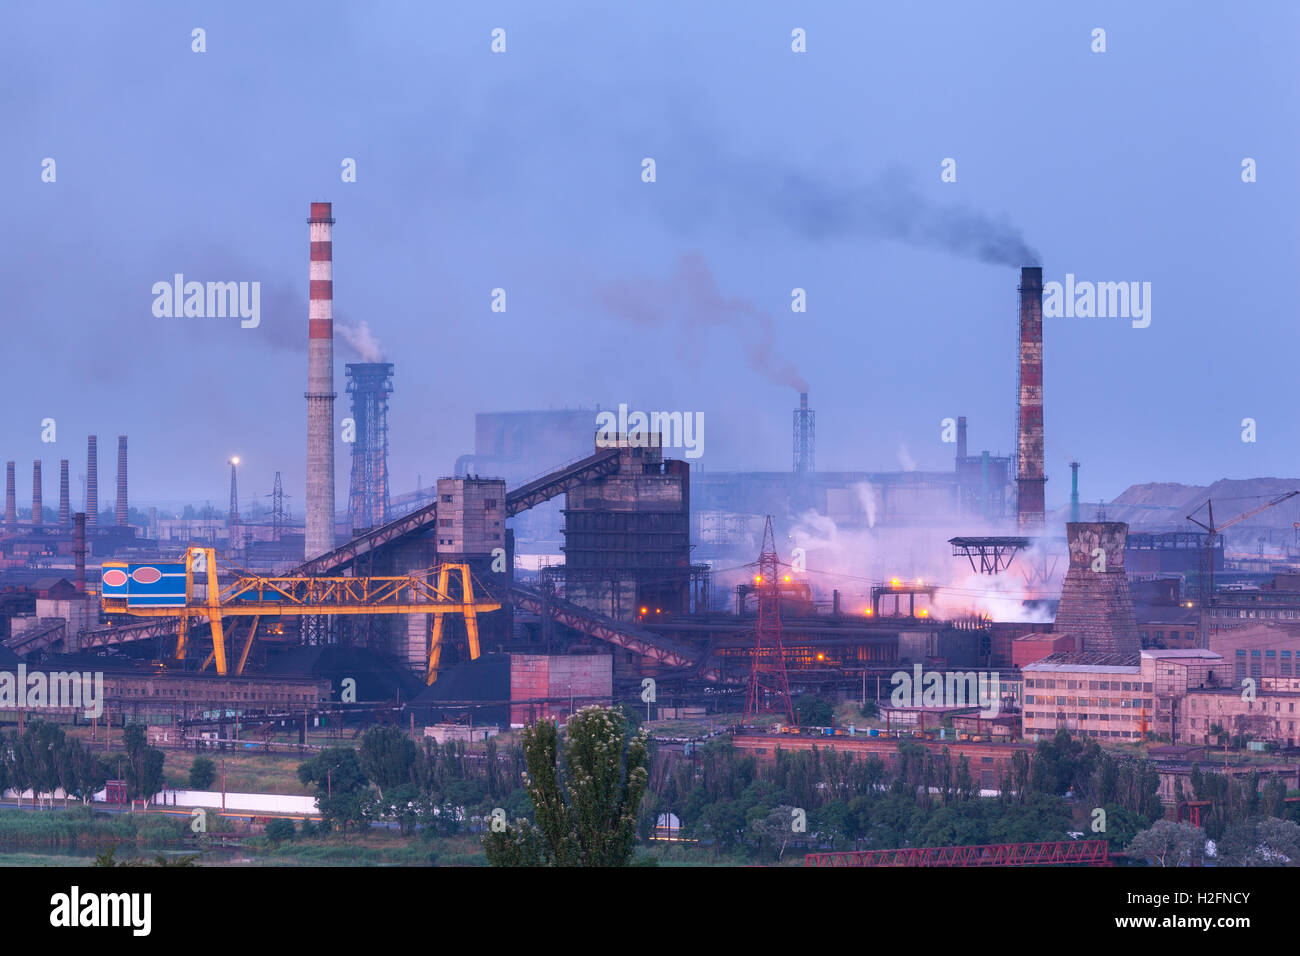 Metallurgical plant at night. Steel factory with smokestacks. Steelworks, iron works. Heavy industry at twilight. Air pollution Stock Photo